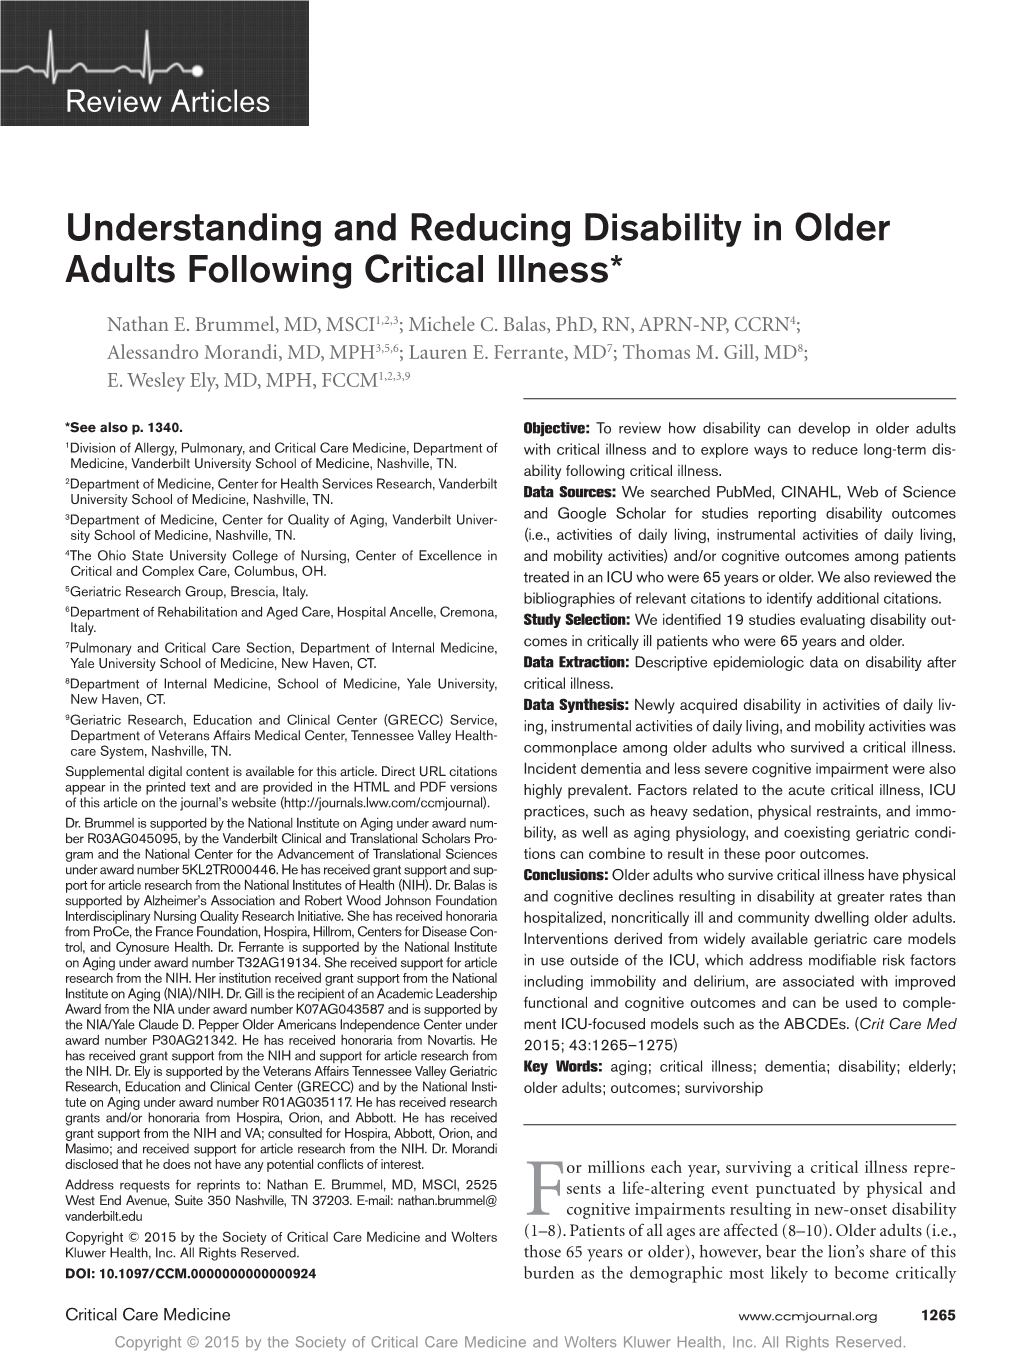 Understanding and Reducing Disability in Older Adults Following Critical Illness*